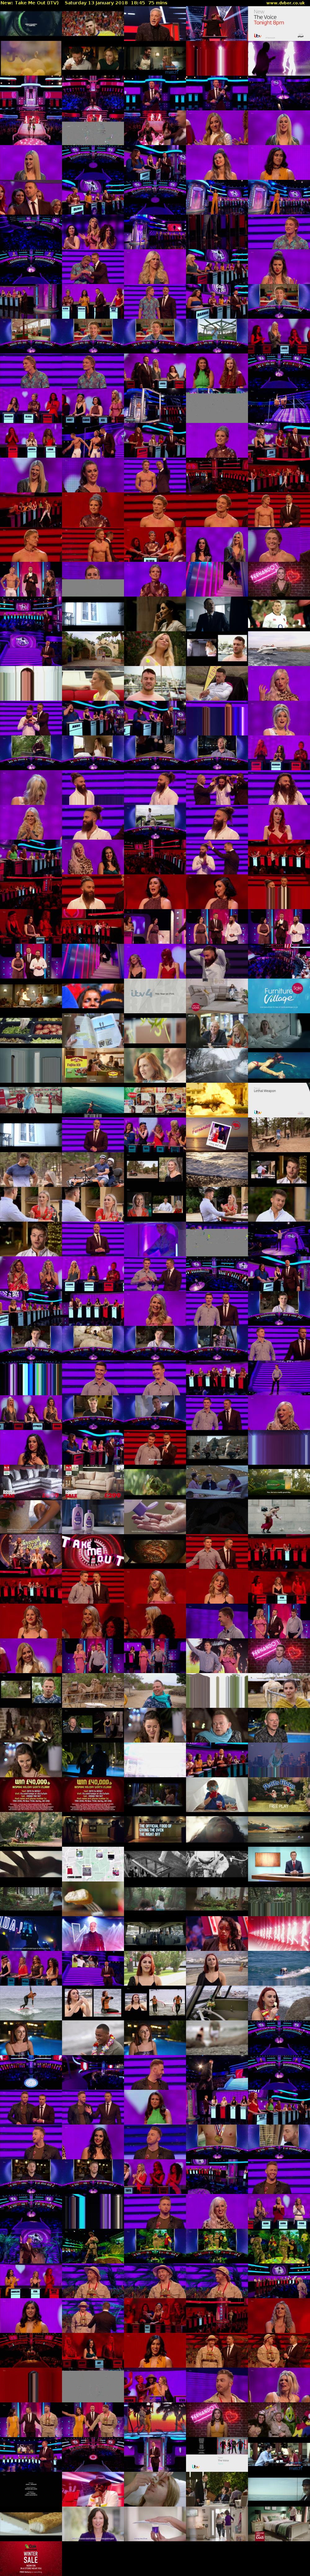 Take Me Out (ITV) Saturday 13 January 2018 18:45 - 20:00